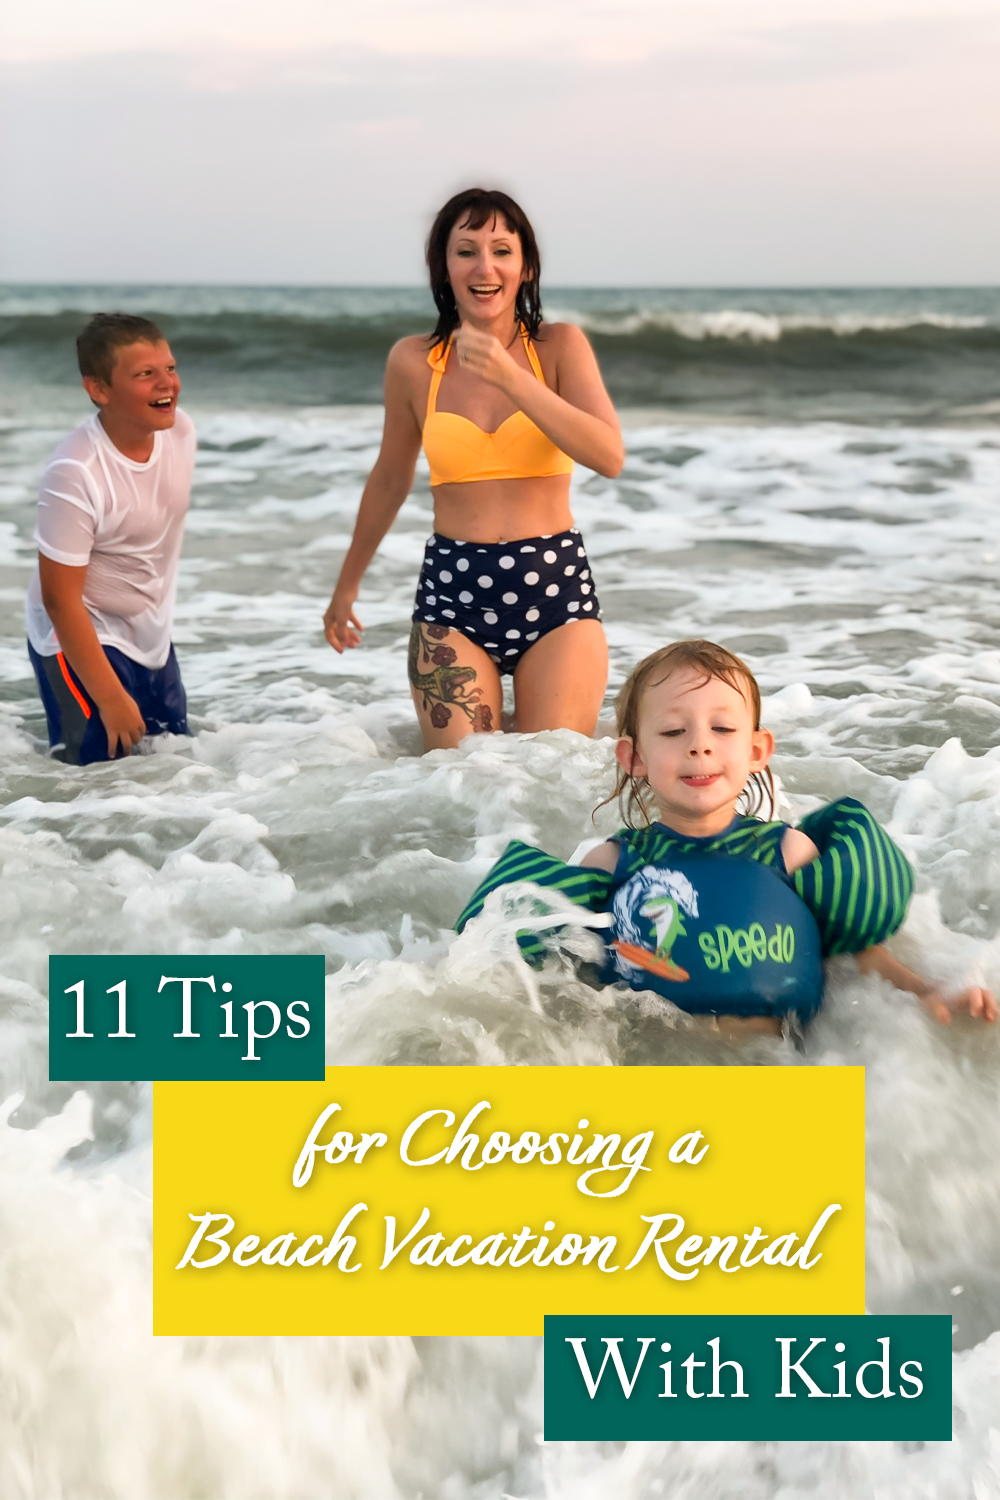 11 Tips for Choosing a Beach Vacation Rental with Kids